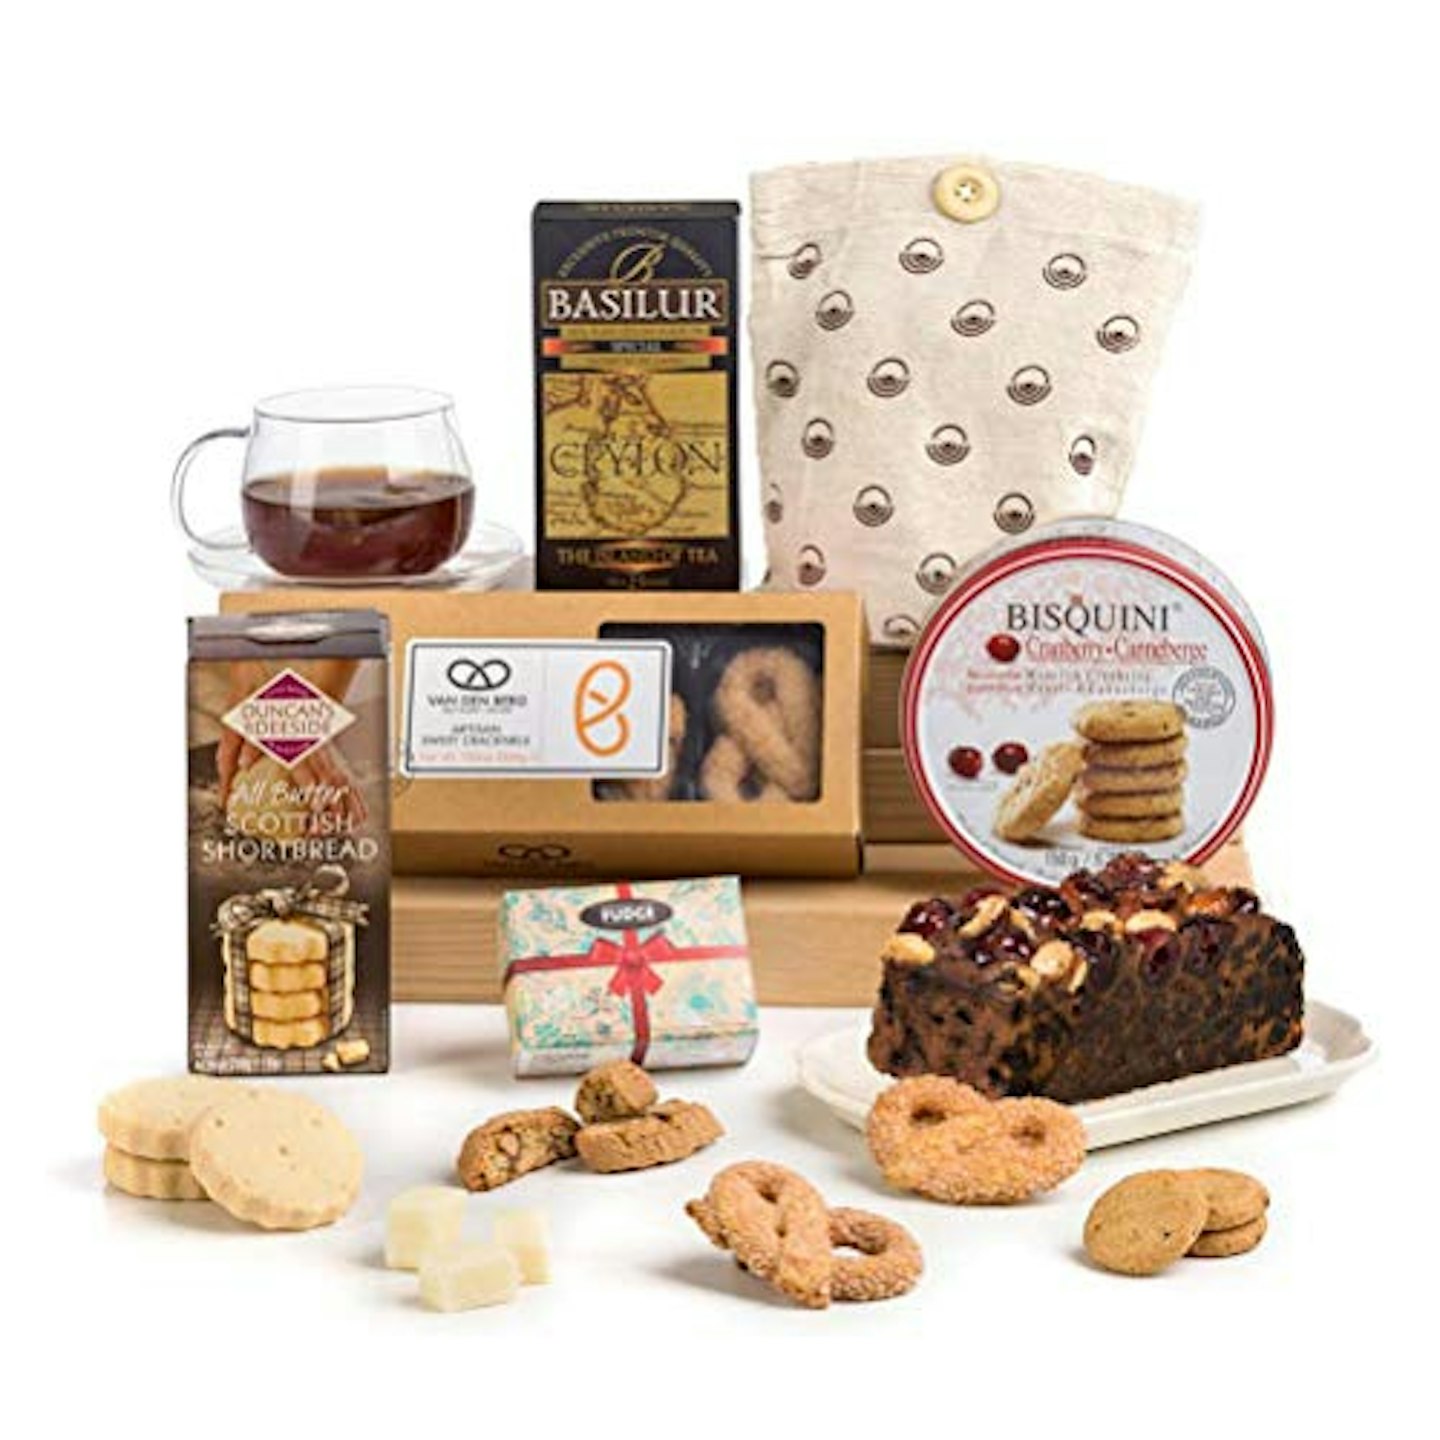 Traditional Afternoon Tea Time Treats Biscuits and Cake Hamper Box